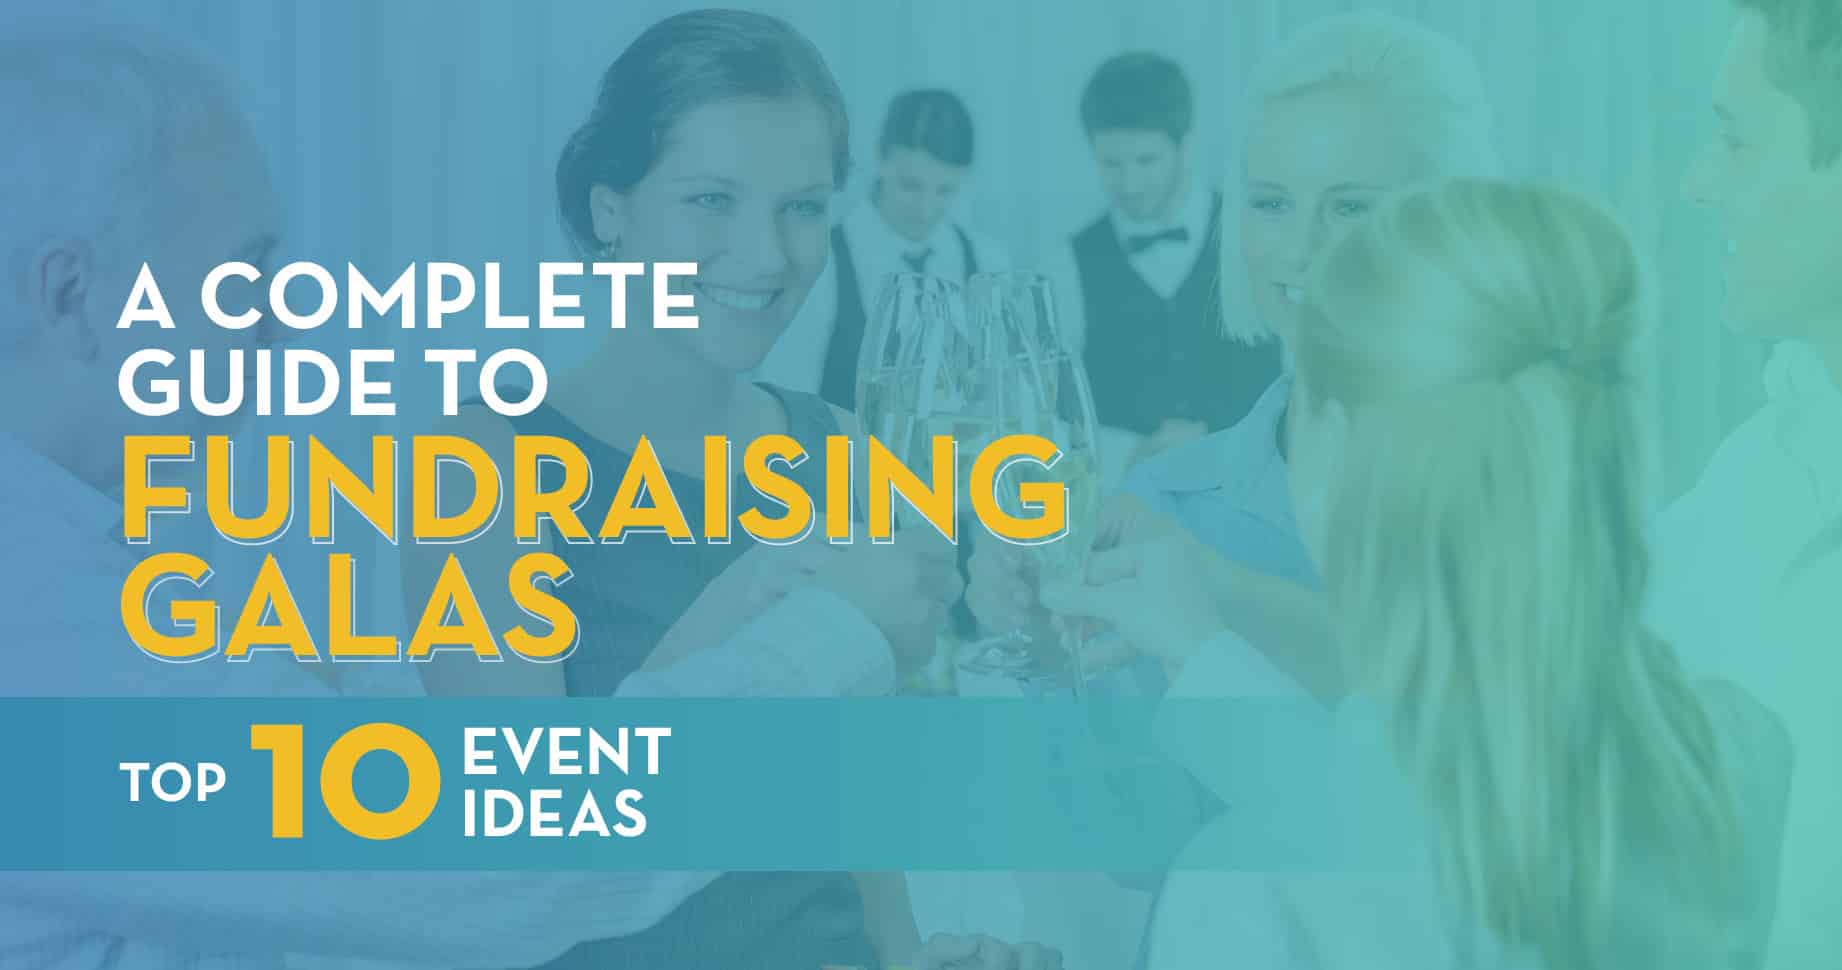 A Complete Guide to Fundraising Galas + Top 10 Event Ideas